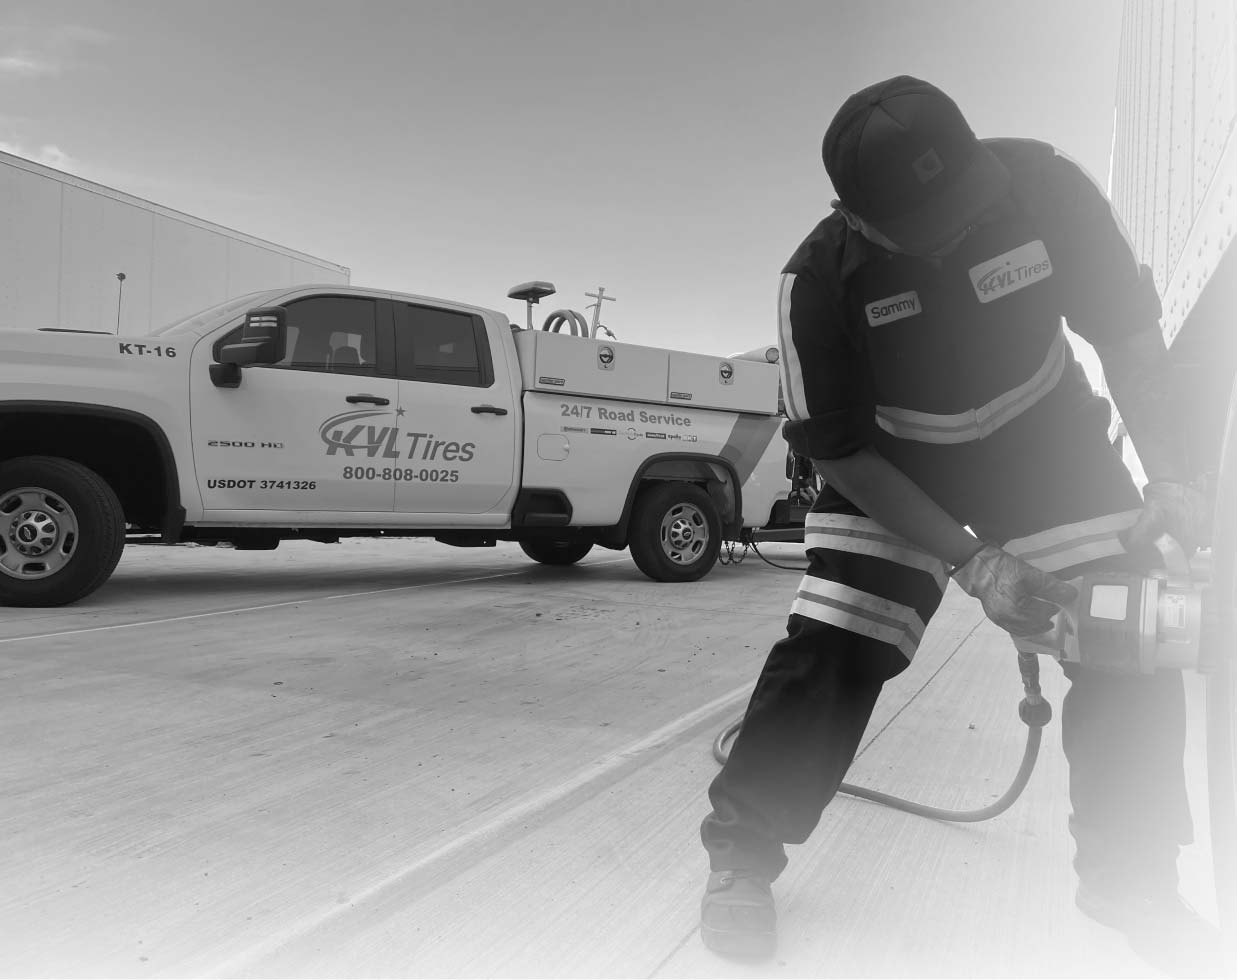 You will get the on-time roadside assistance service by our experts. KVL Tires are here for you to provide hassle free and reliable roadside assistance.